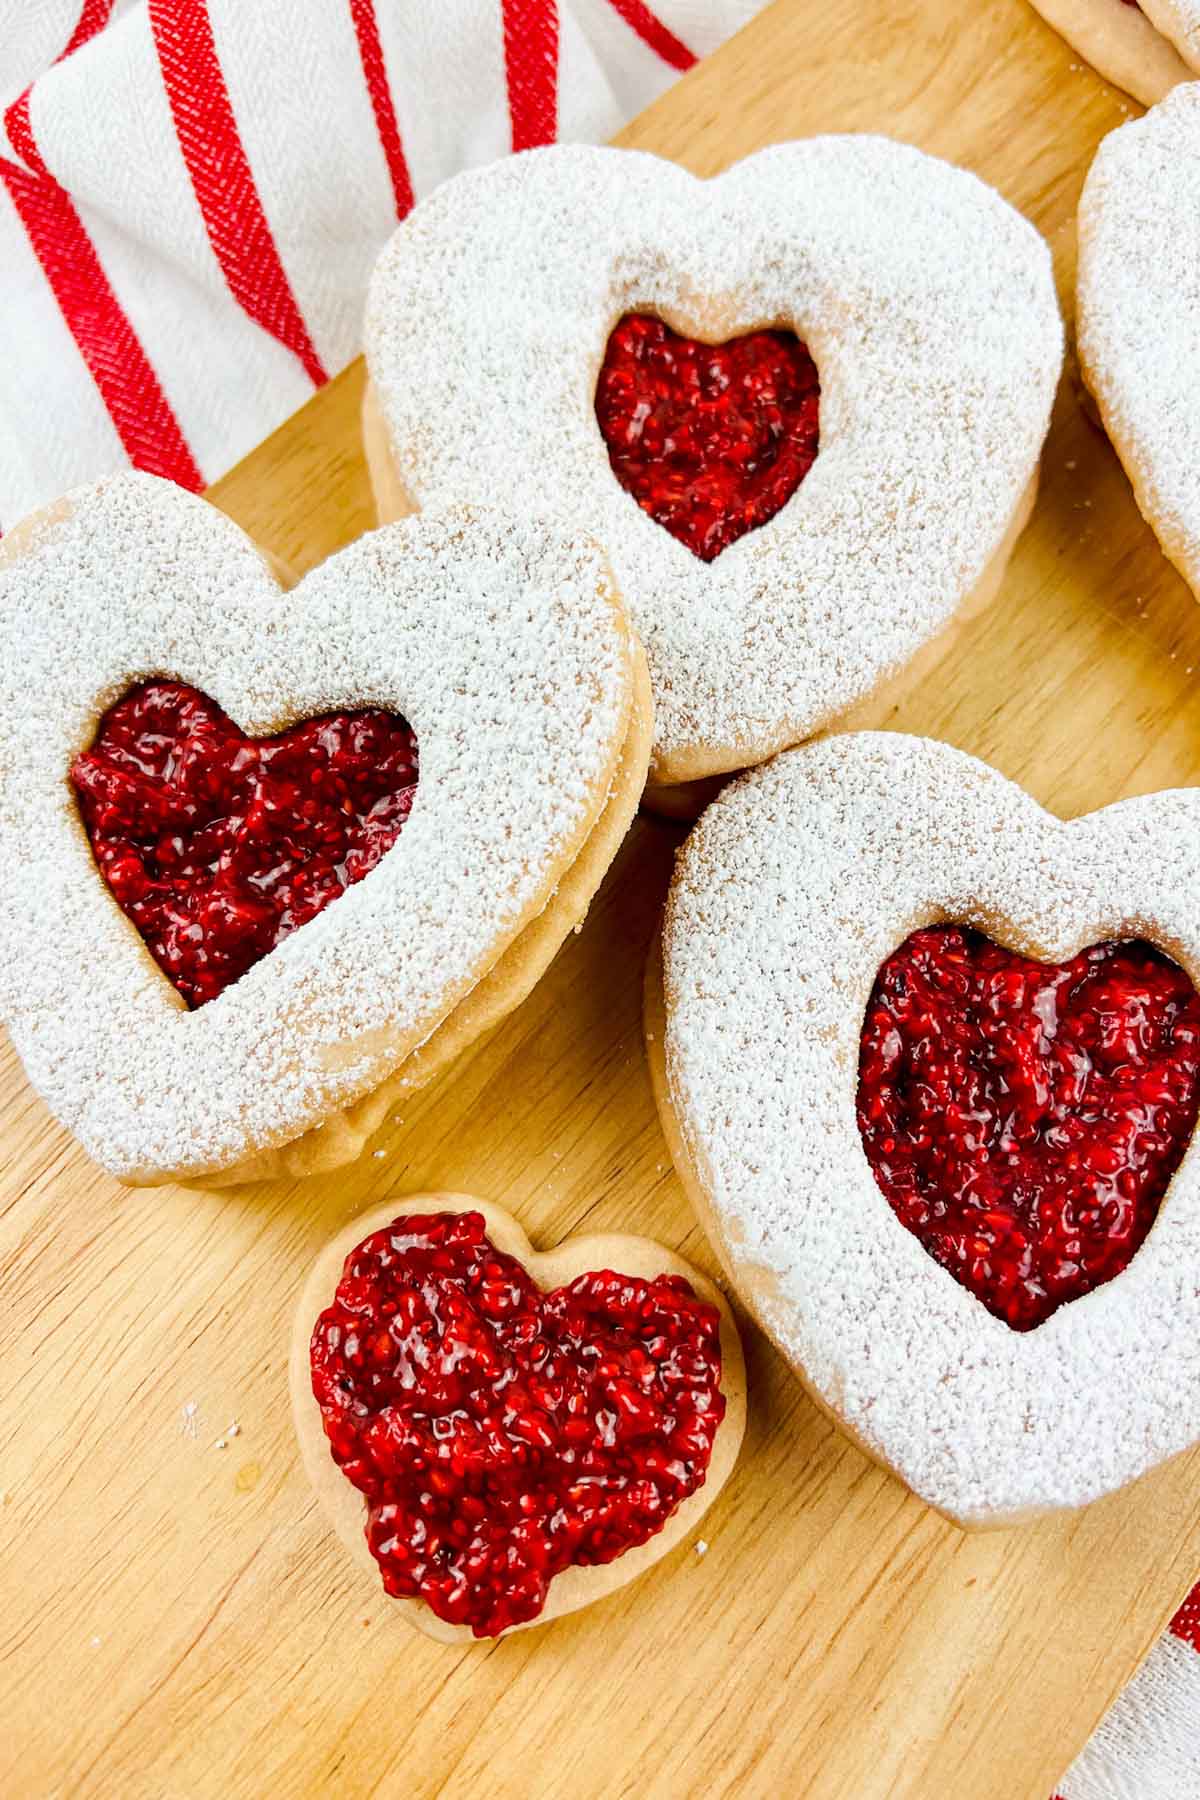 Jam filled heart shaped cookies on a wood board.